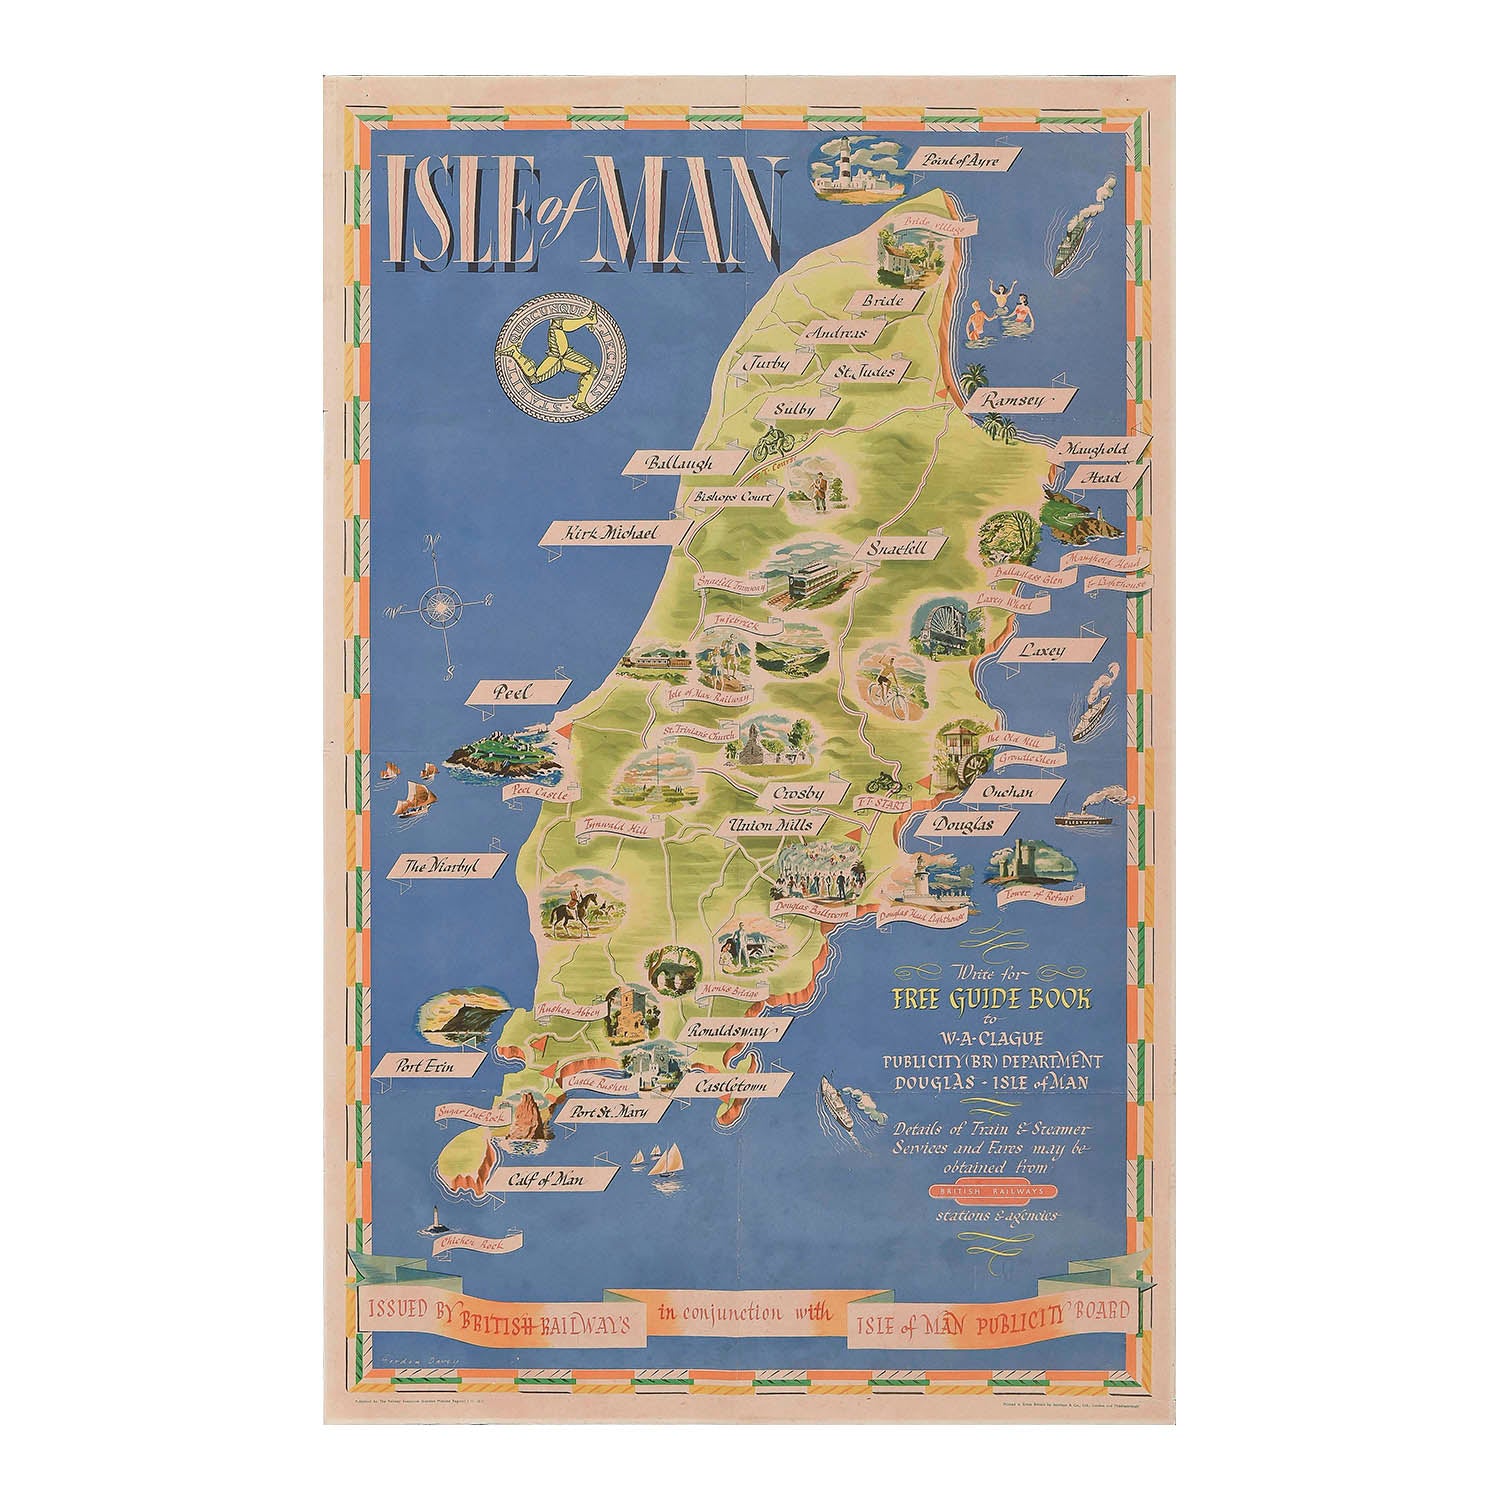 Original British Railways decorative poster map of the Isle of Man by Gordon Davey, 1950. An attractively laid out design featuring vignettes of places to visit, including Ramsey, Douglas, Laxey, Castletown, Peel and Snaefell.